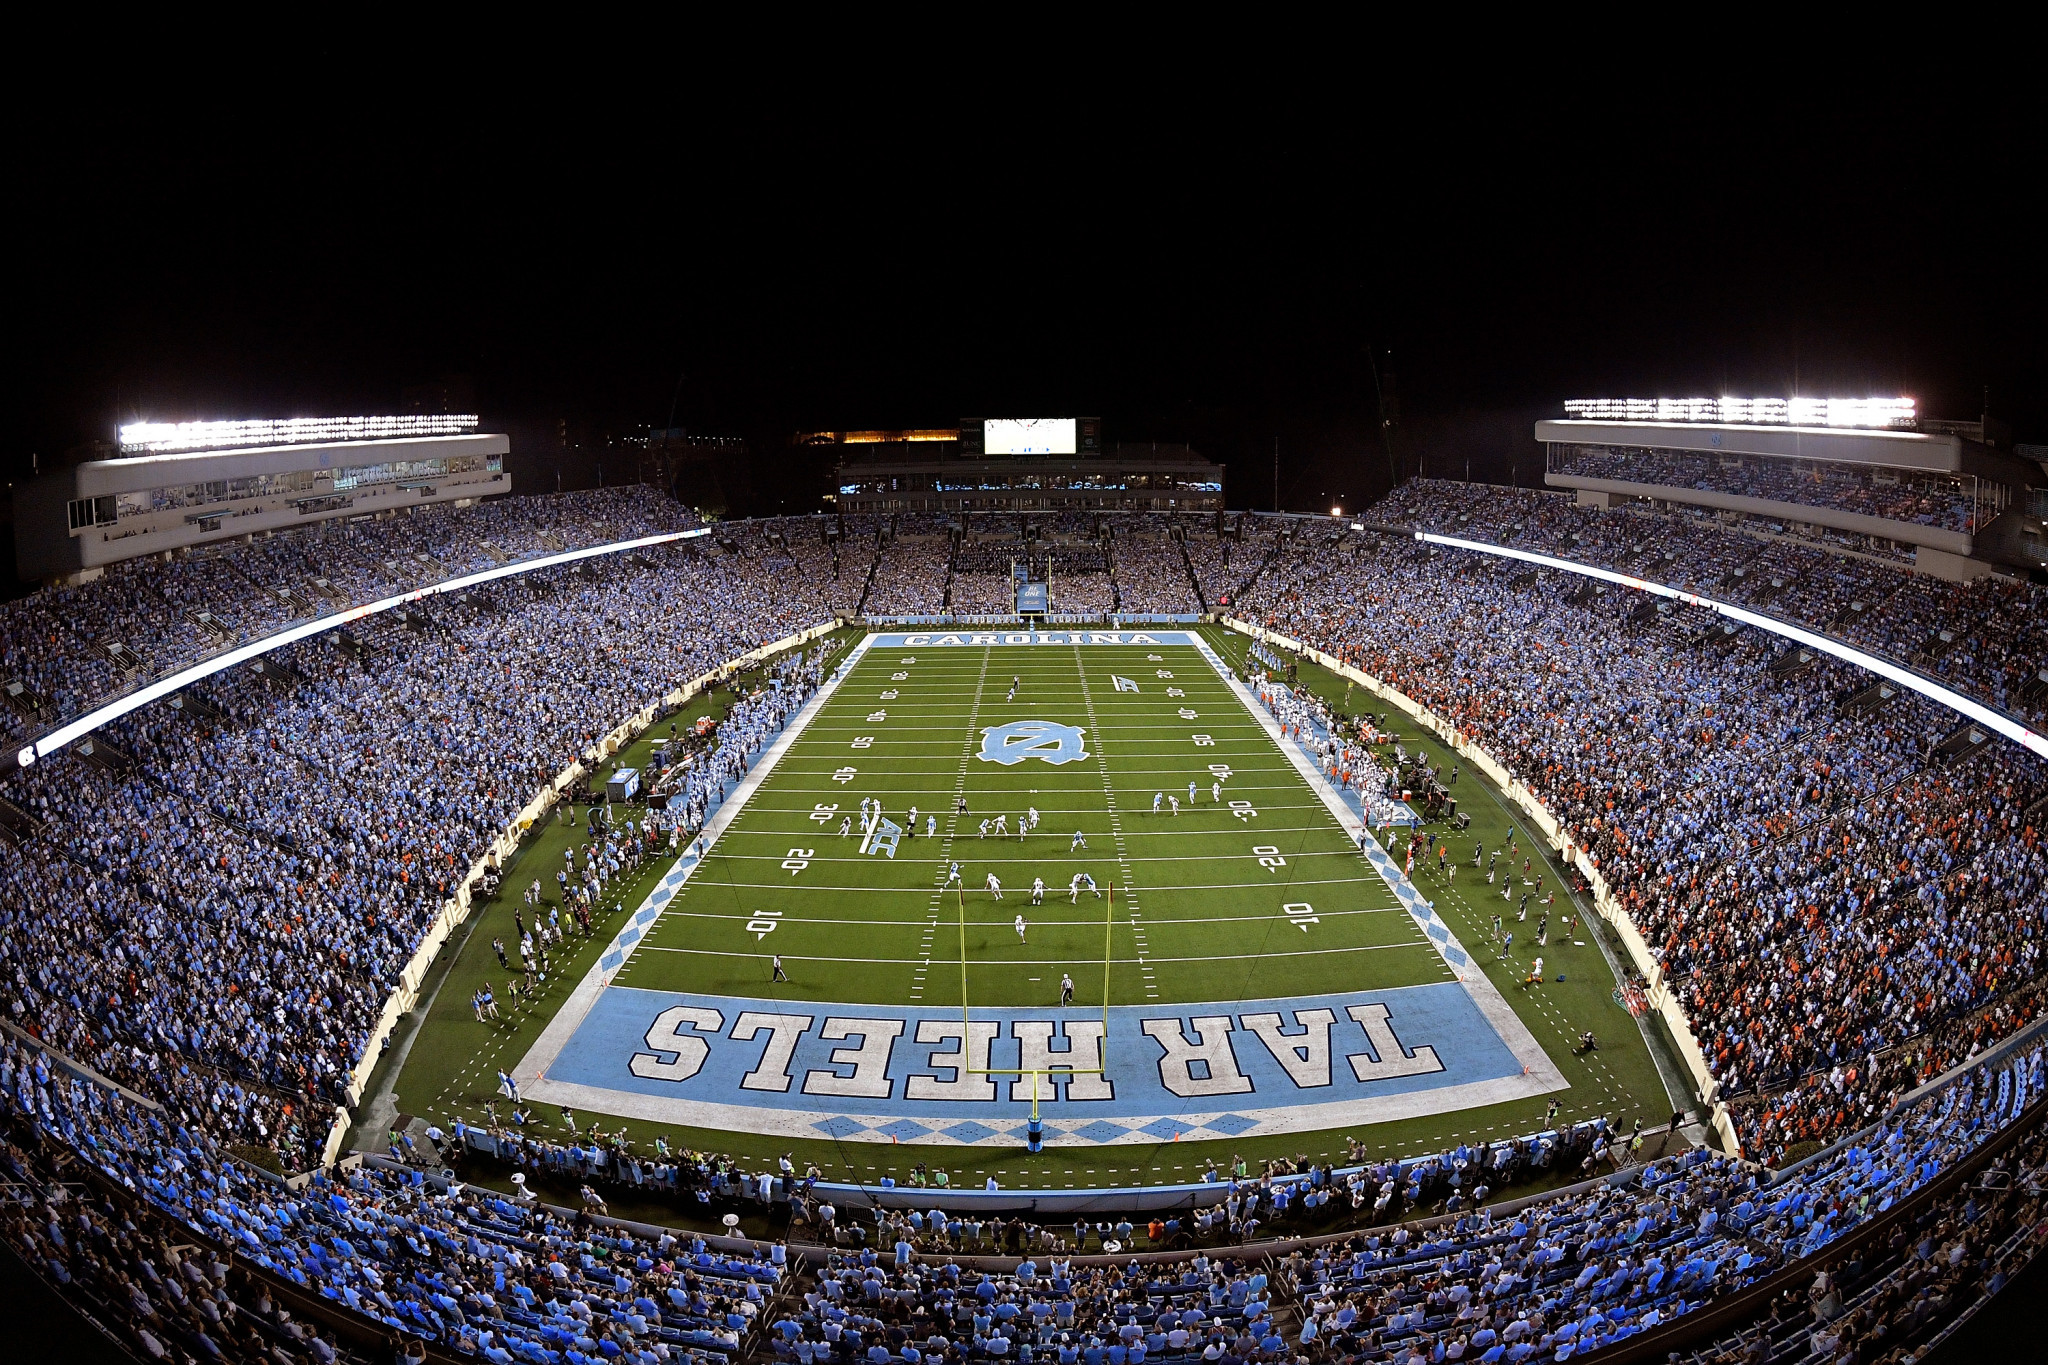 Kenan Stadium in Chapel Hill has been suggested for the Opening Ceremony ©Getty Images